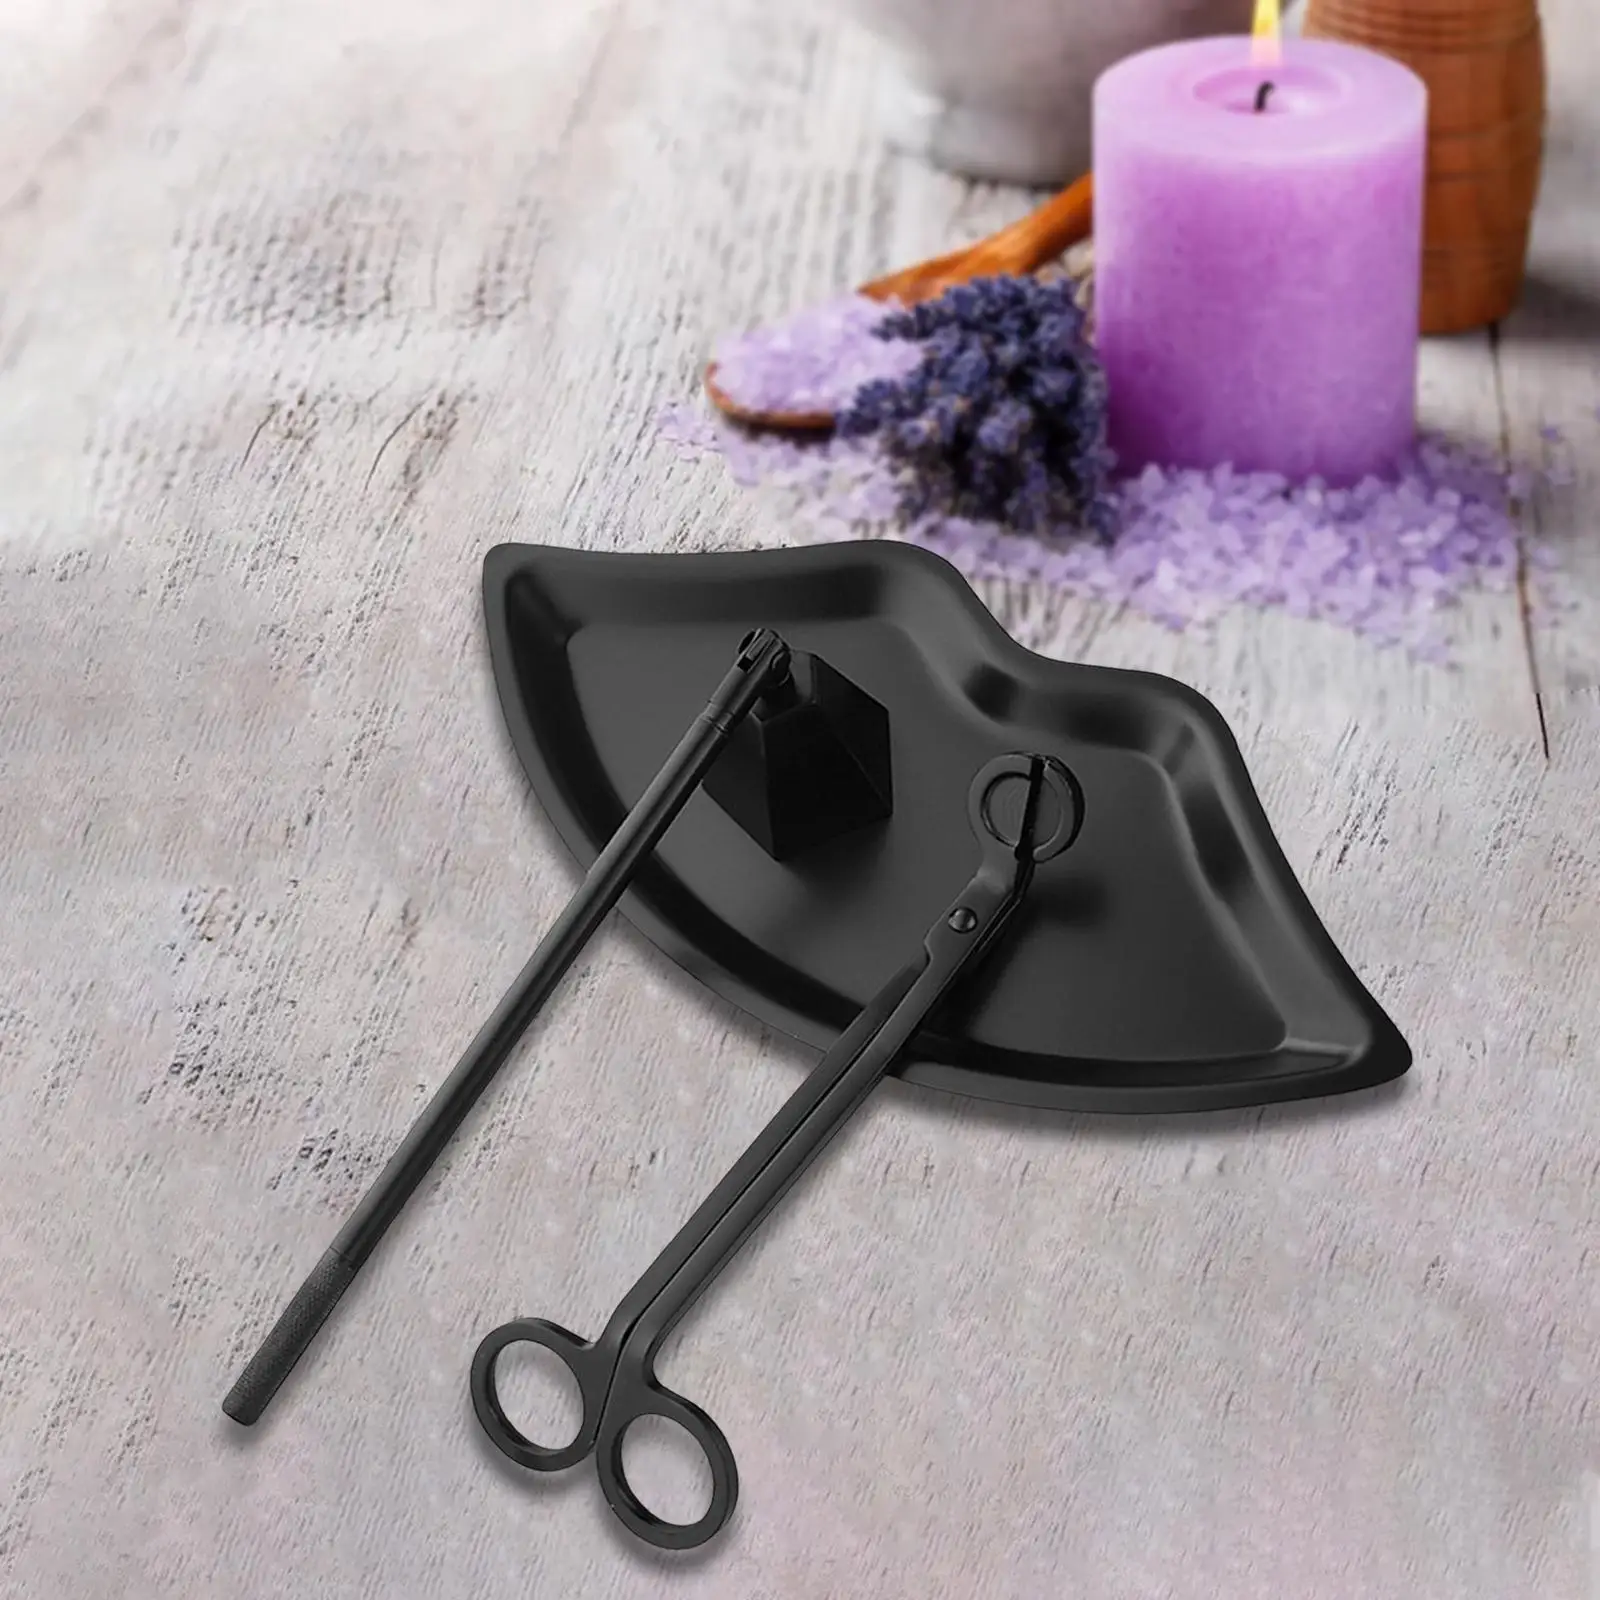 Candle Accessory Set Wick Trimmer Candle Snuffer Tray for Putting Out Candles Flame Safely Thanksgiving Christmas Pillar Candle